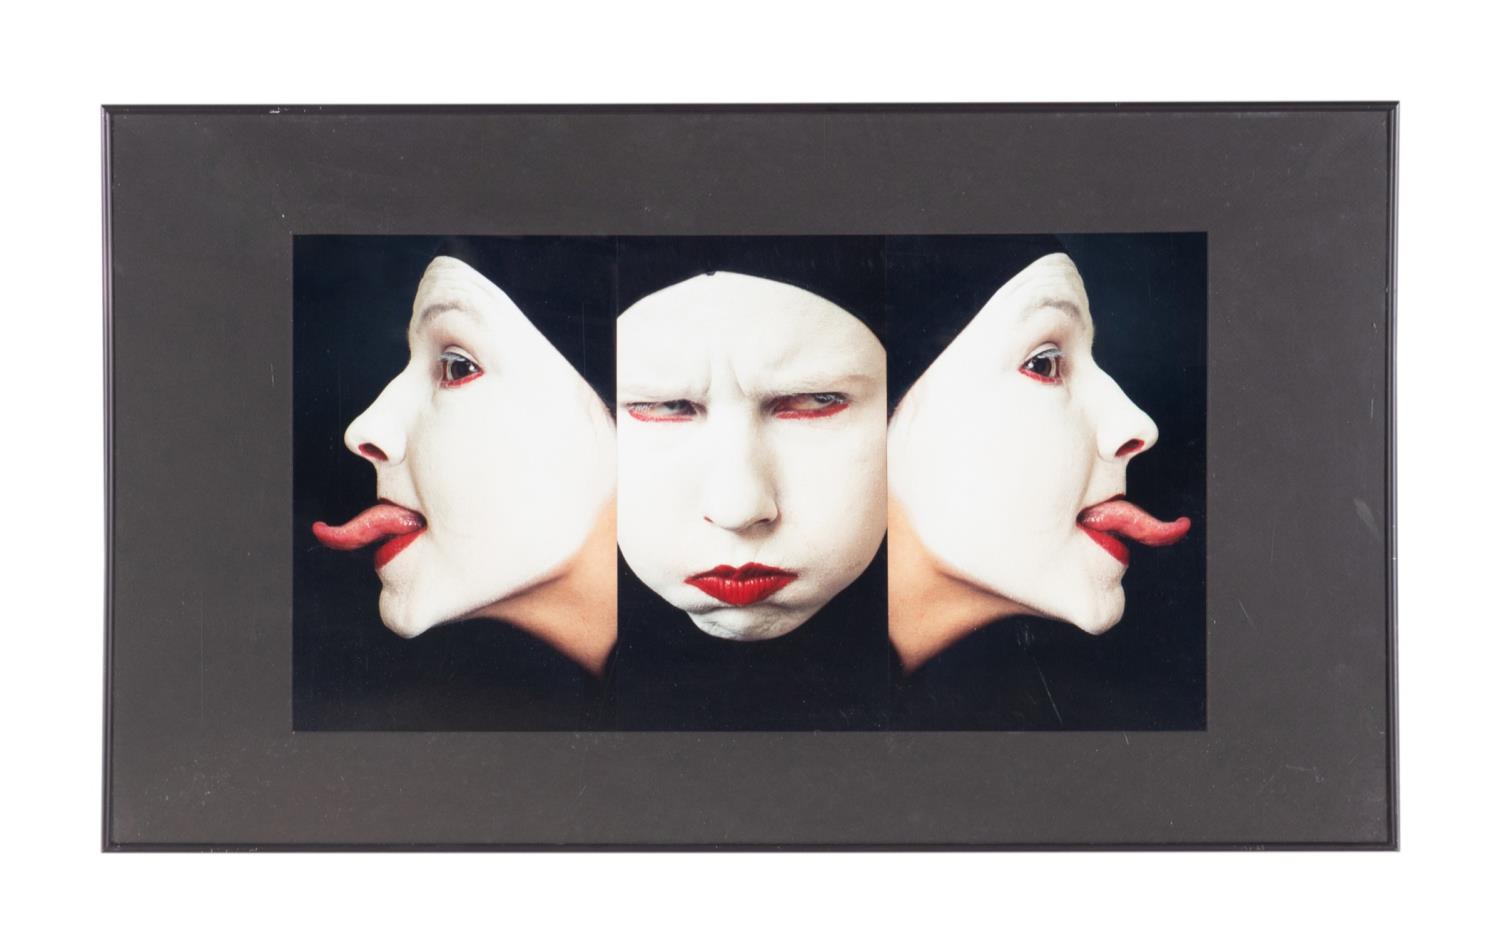  MIME TRIPTYCH PHOTOGRAPHS FRAMED 3cd968